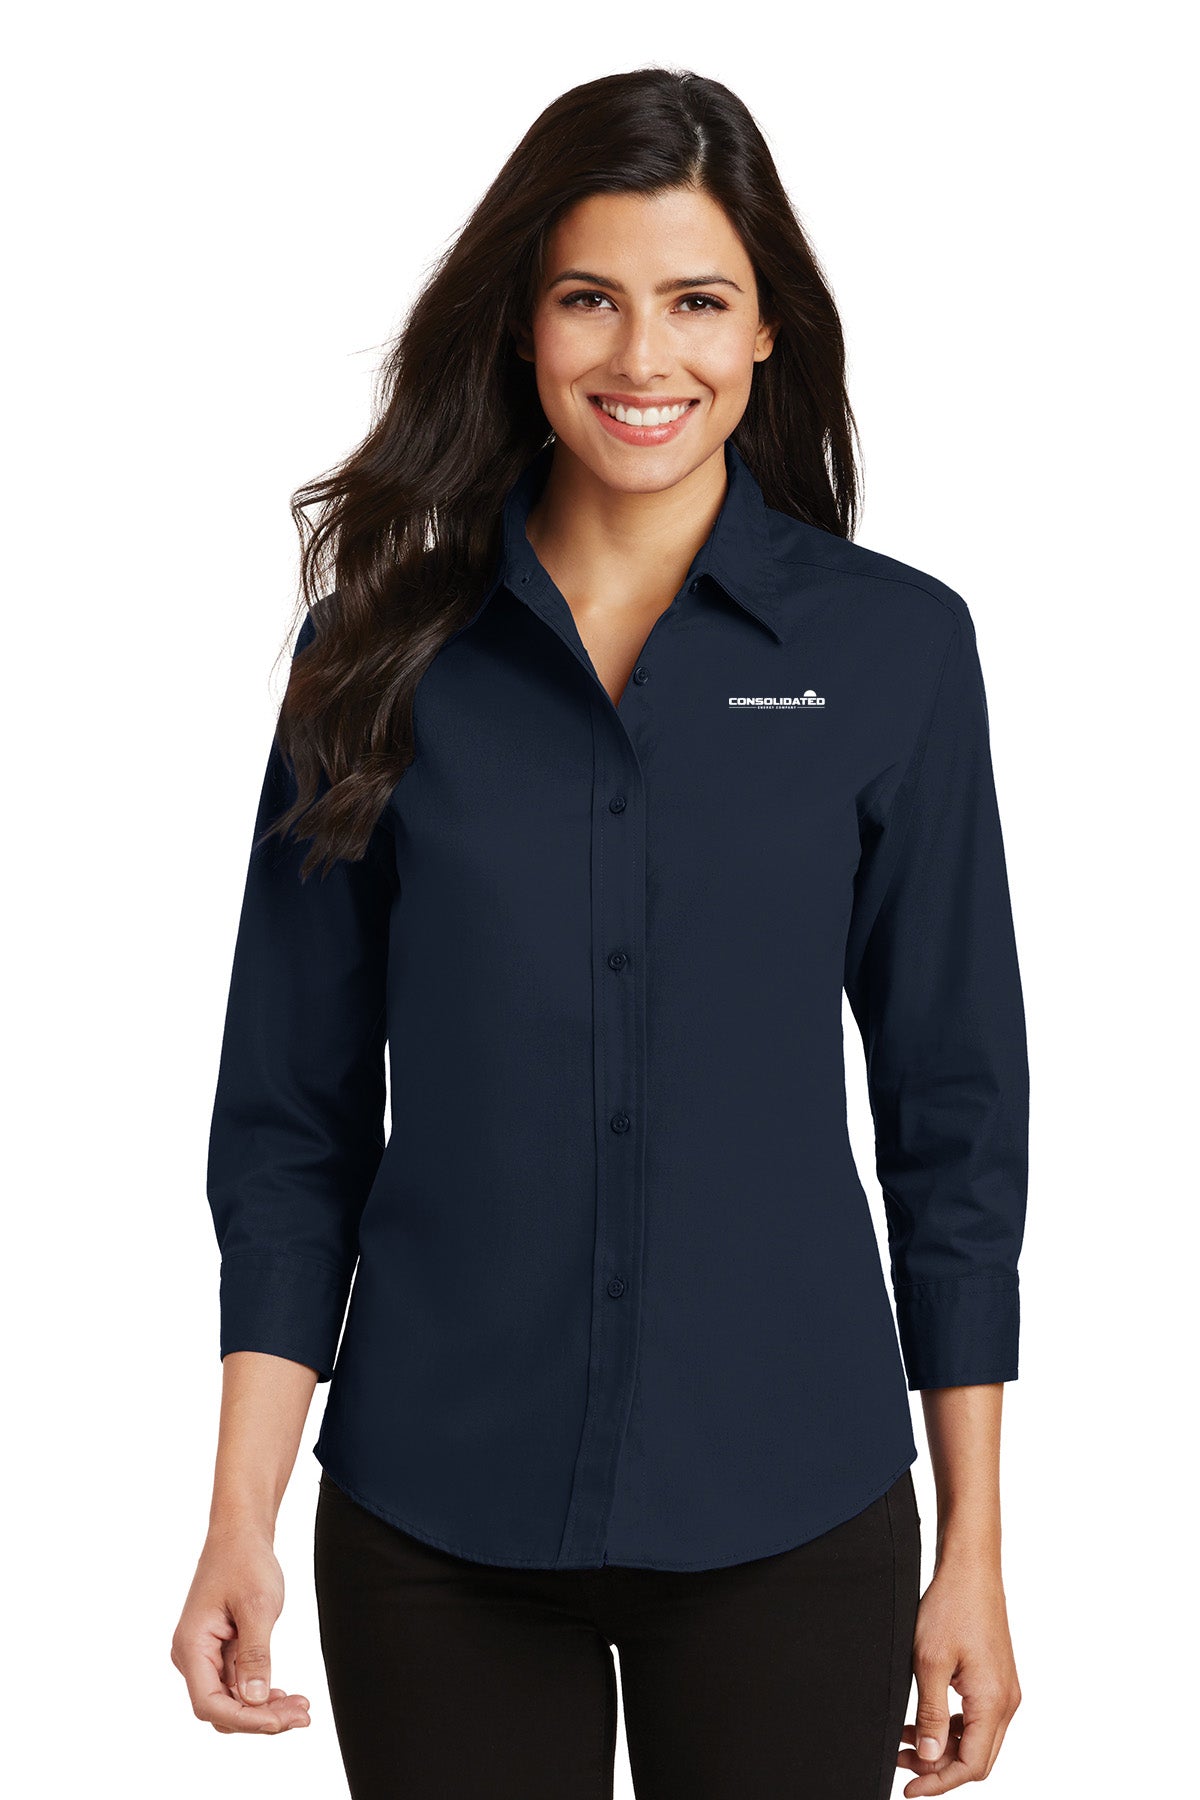 Consolidated Energy Company Ladies Button Up Shirt